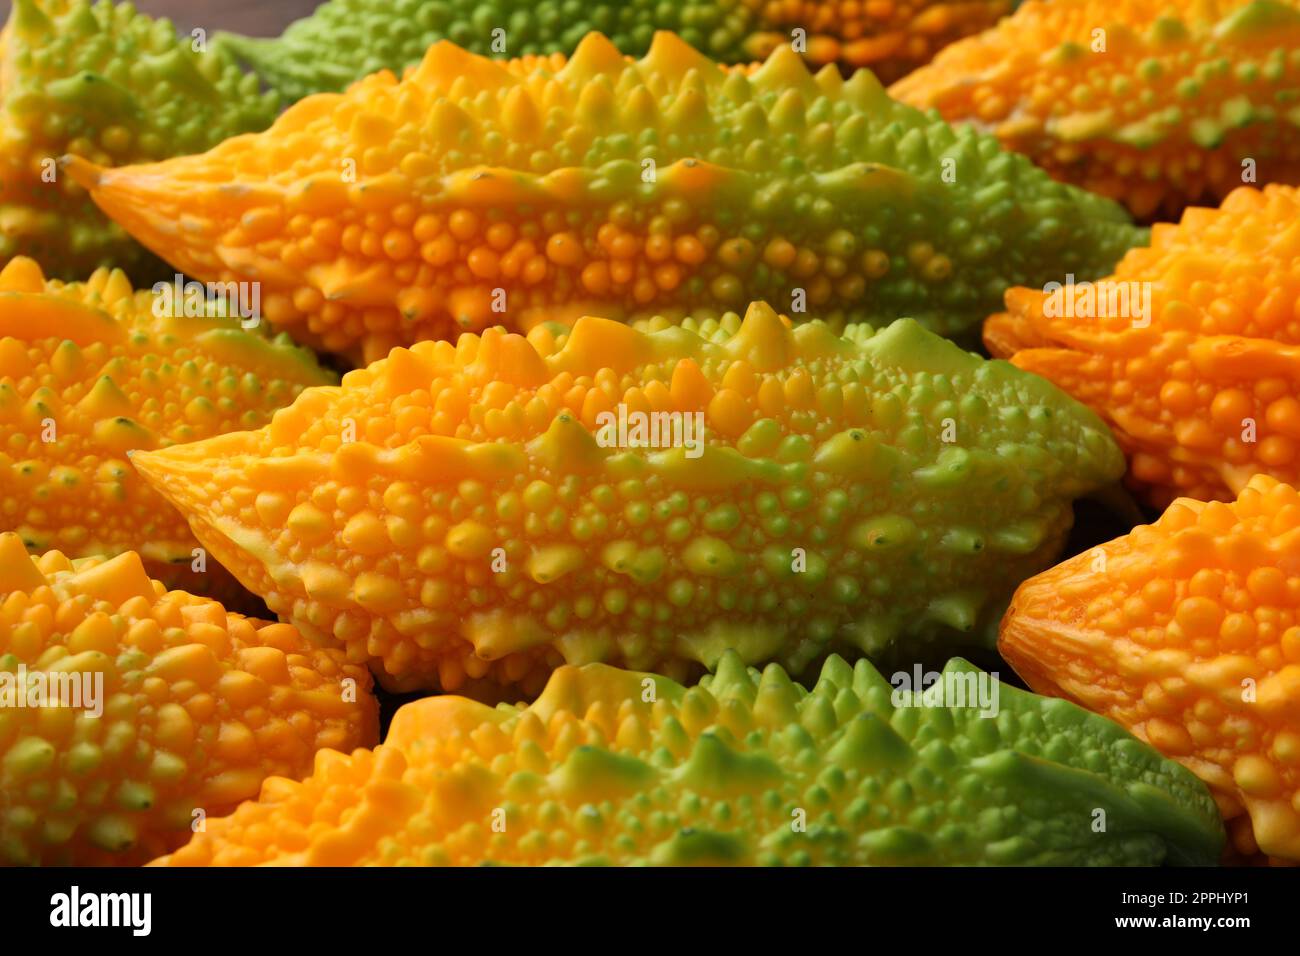 Tasty fresh bitter melons as background, closeup Stock Photo